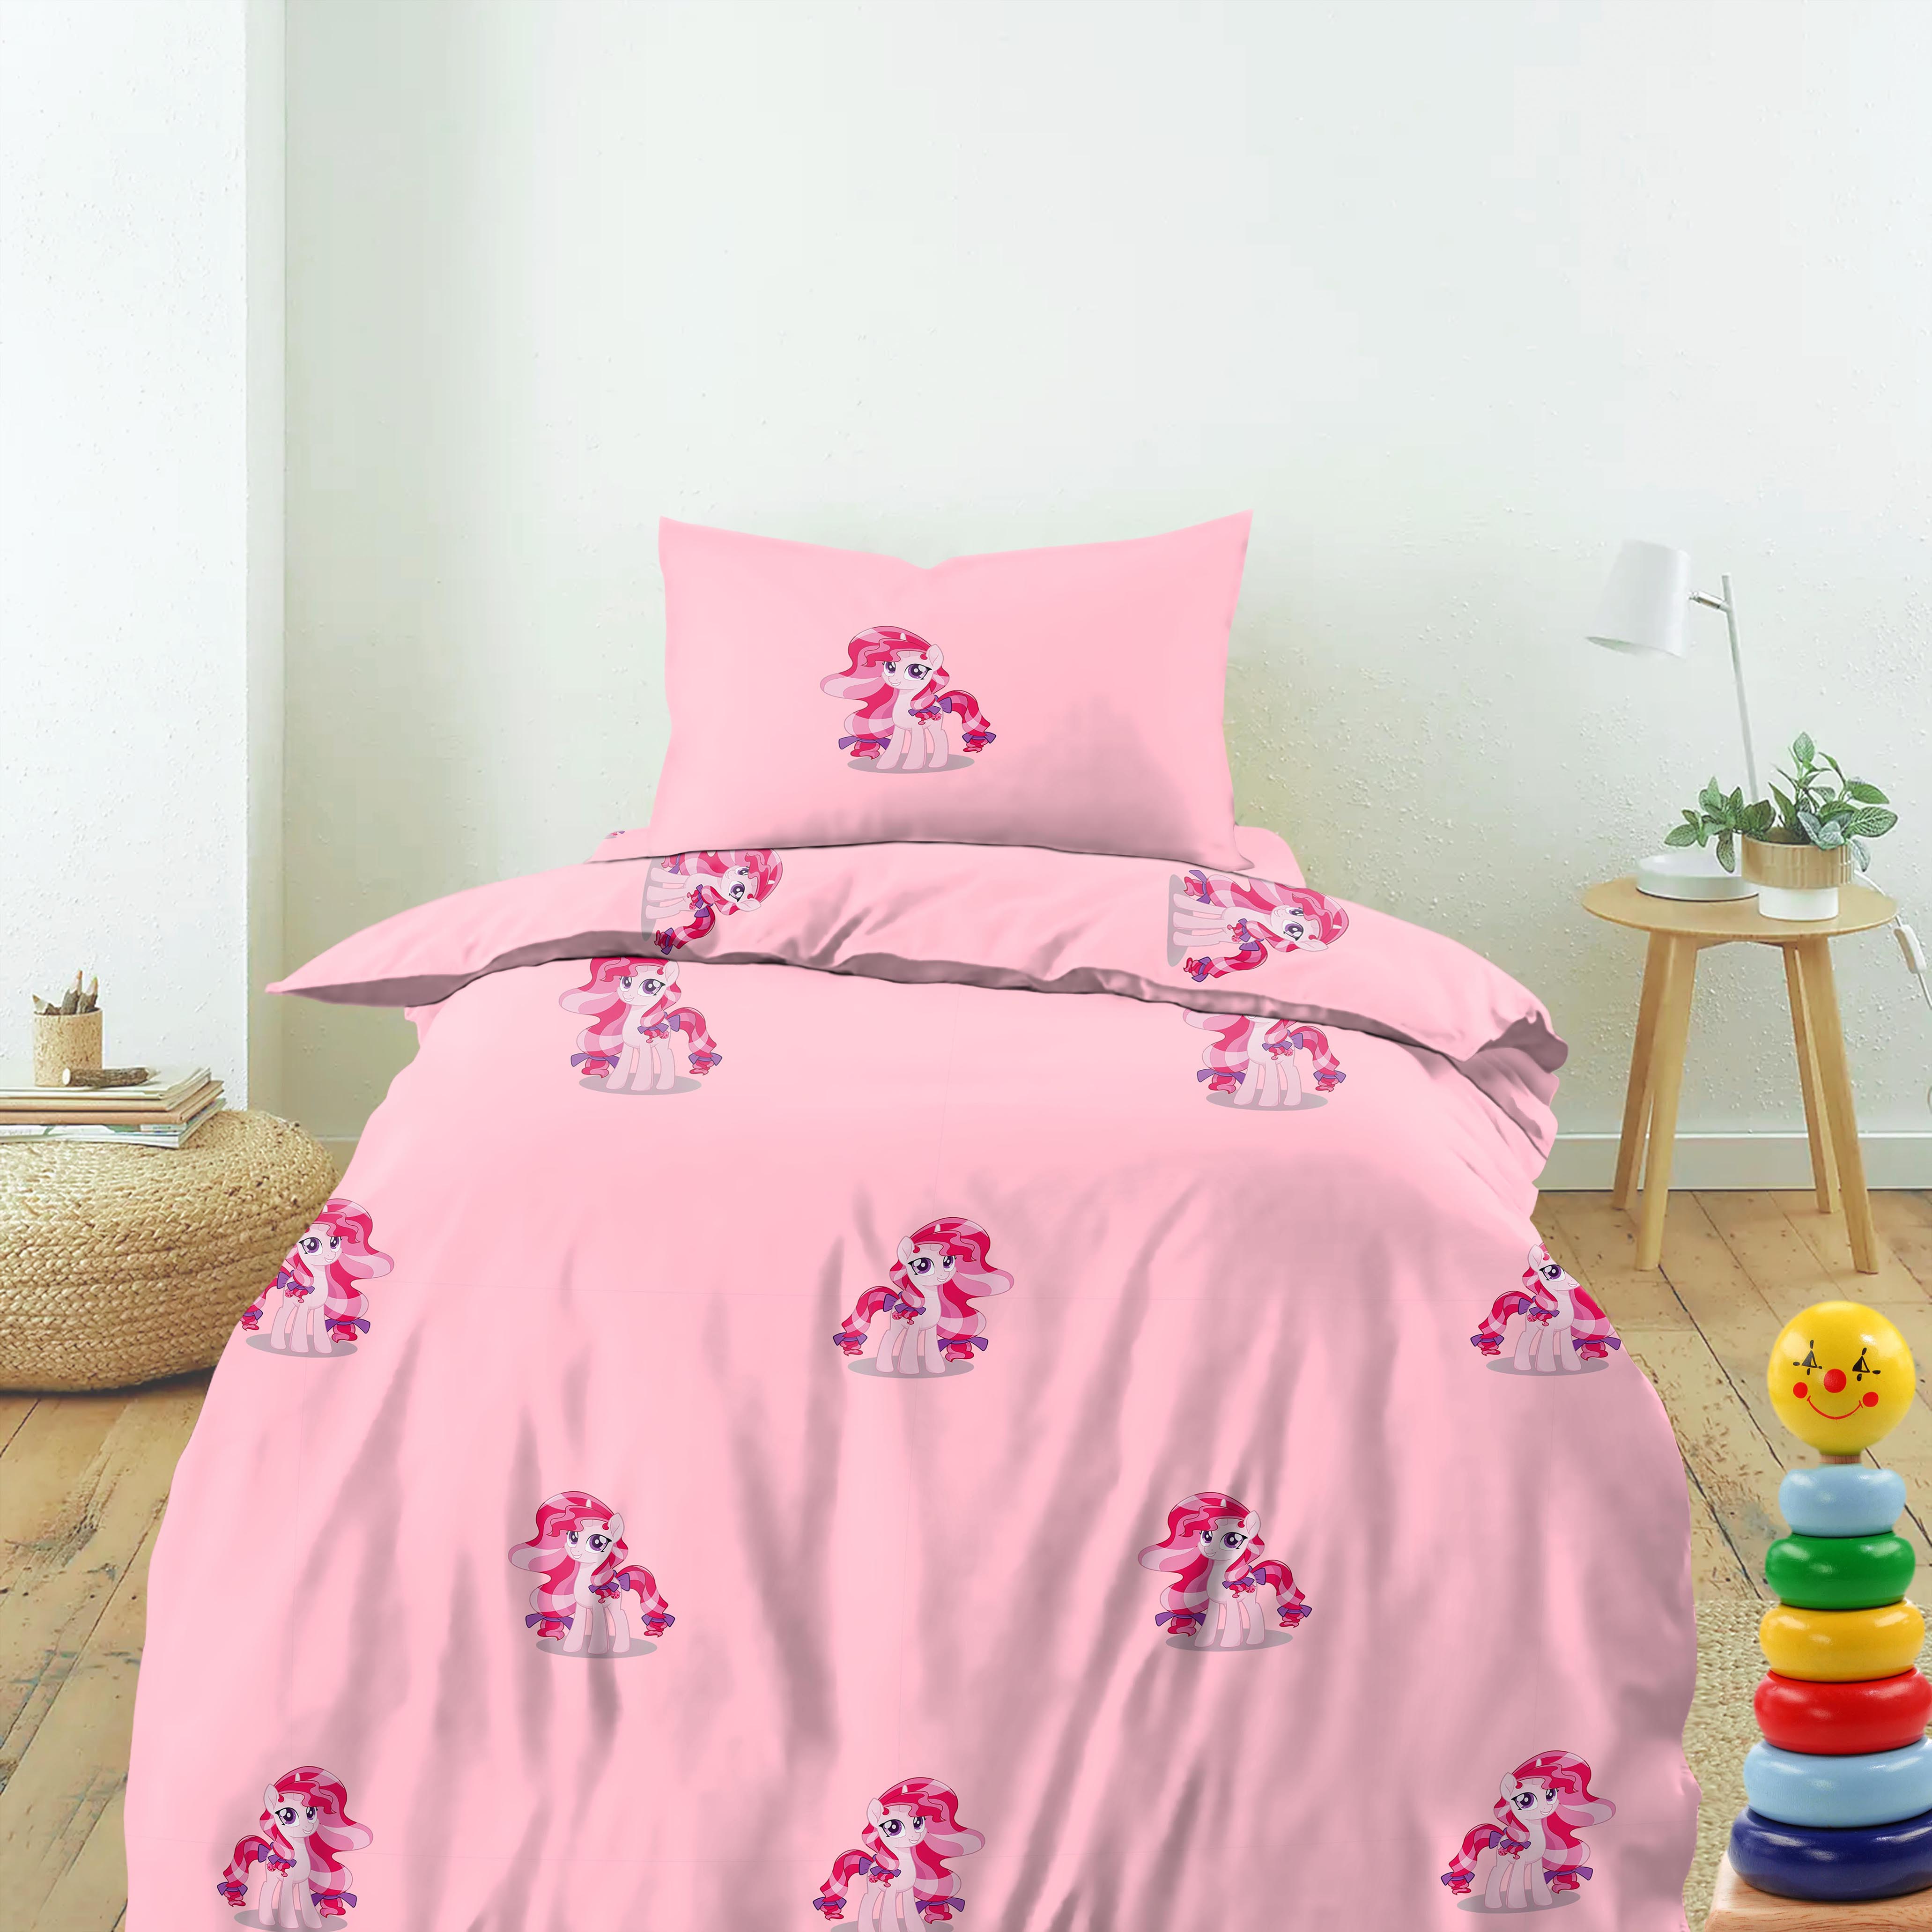 Bedcover My little Pony For Single Bed with Pillow Covers King Size (60" X 90")